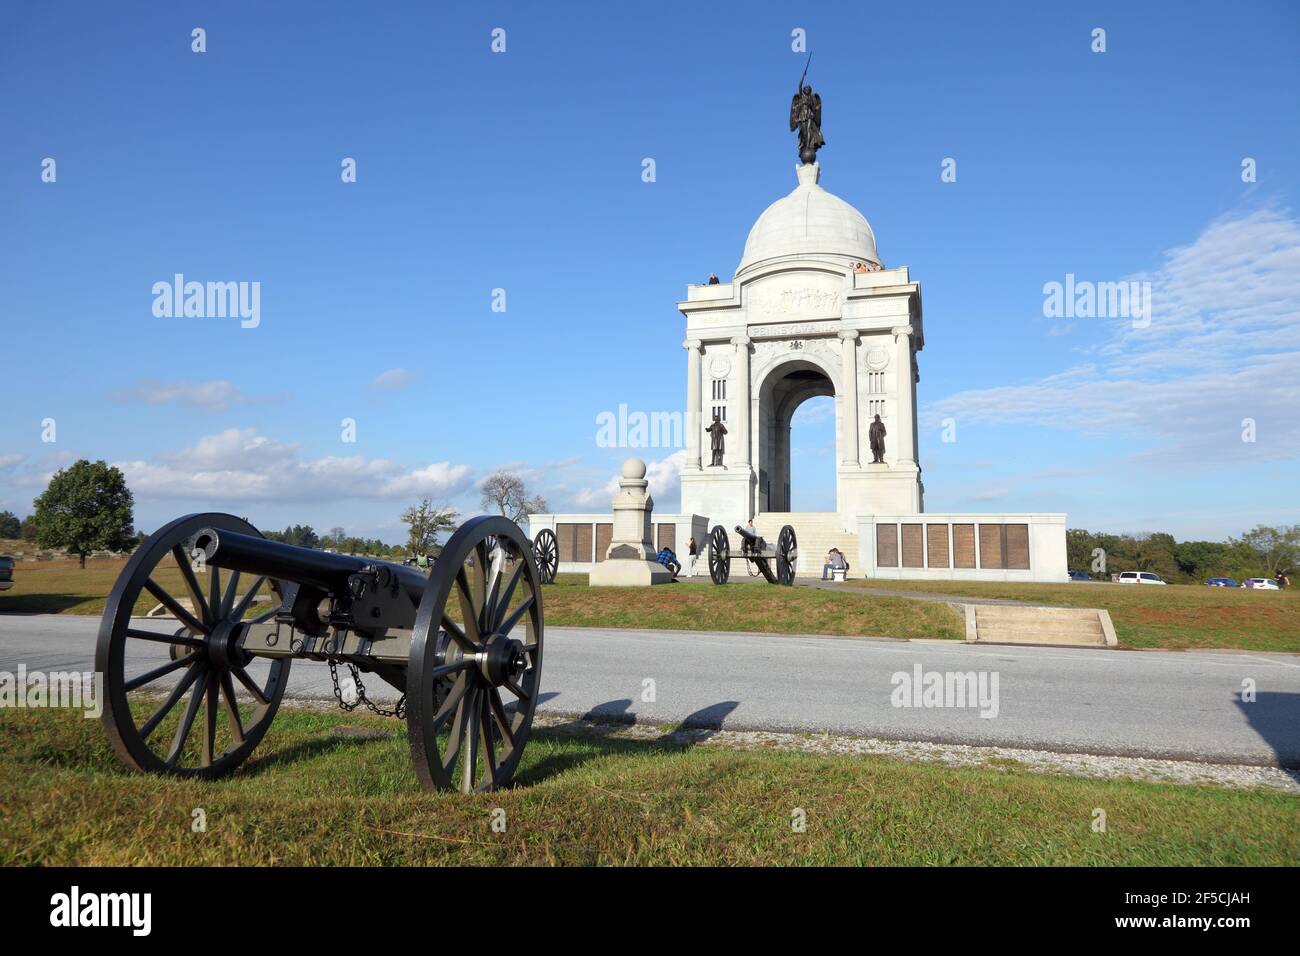 Geographie / Reisen, USA, Pennsylvania, Gettysburg, Pennsylvania Monument, Gettysburg National Military, Additional-Rights-Clearance-Info-Not-Available Stockfoto